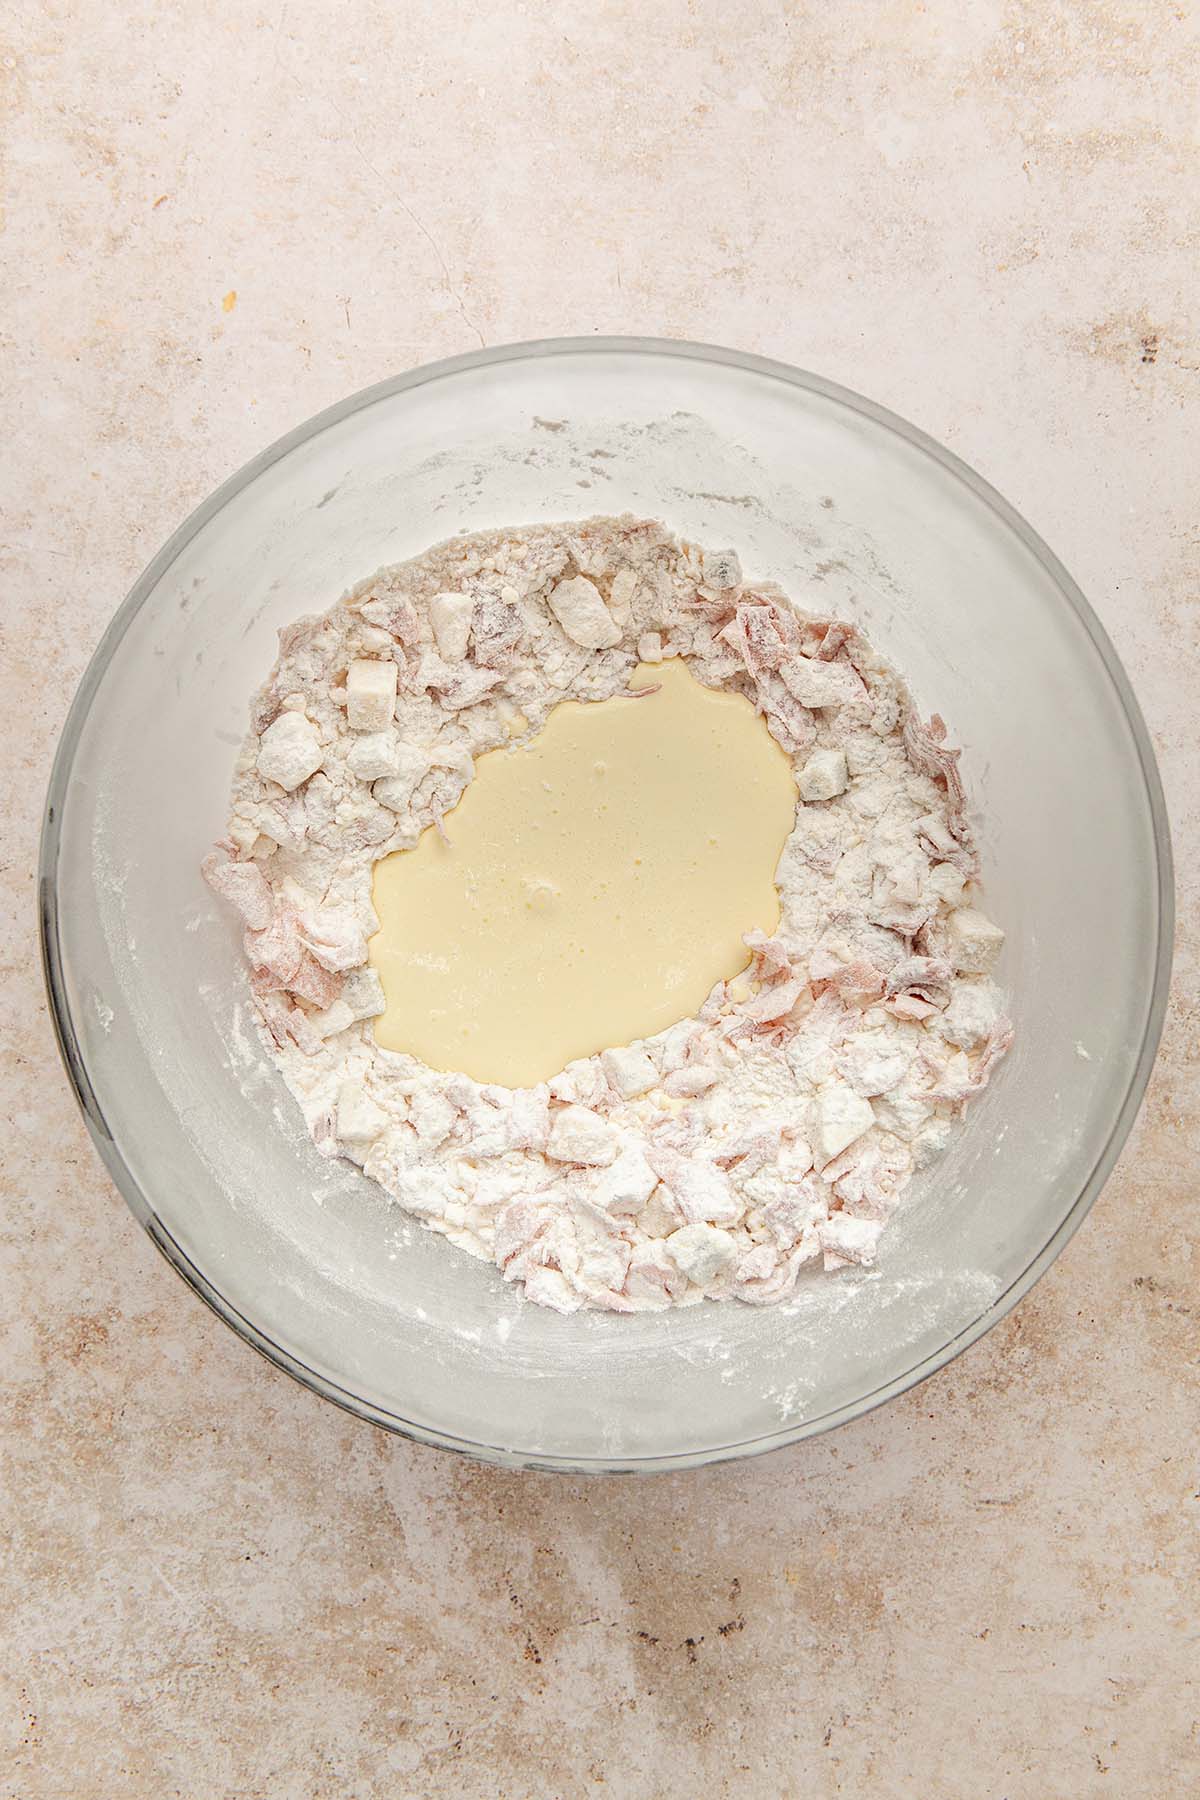 A bowl of dry ingredients with wet ingredients poured into the middle, unmixed.